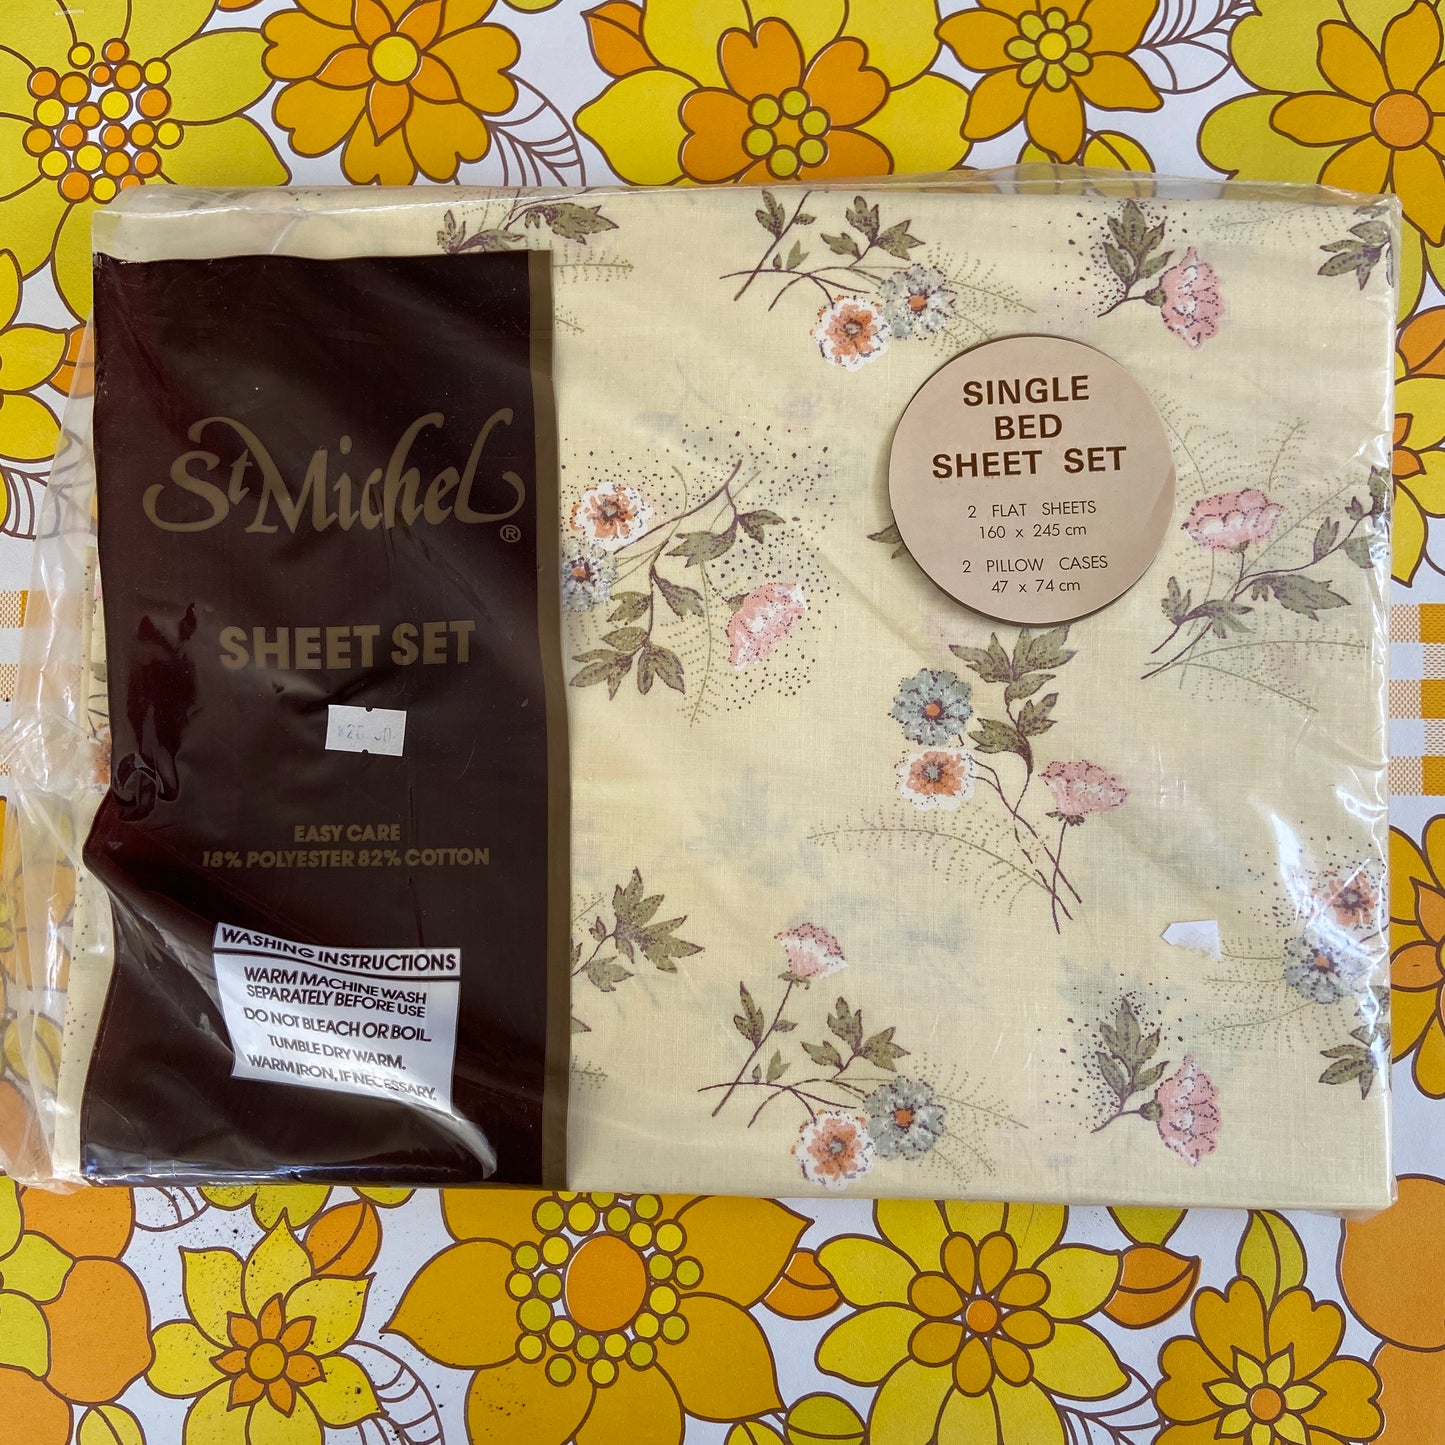 UNUSED Single BED Sheet Set in Packaging 2 Flat & 2 Pillow Cases